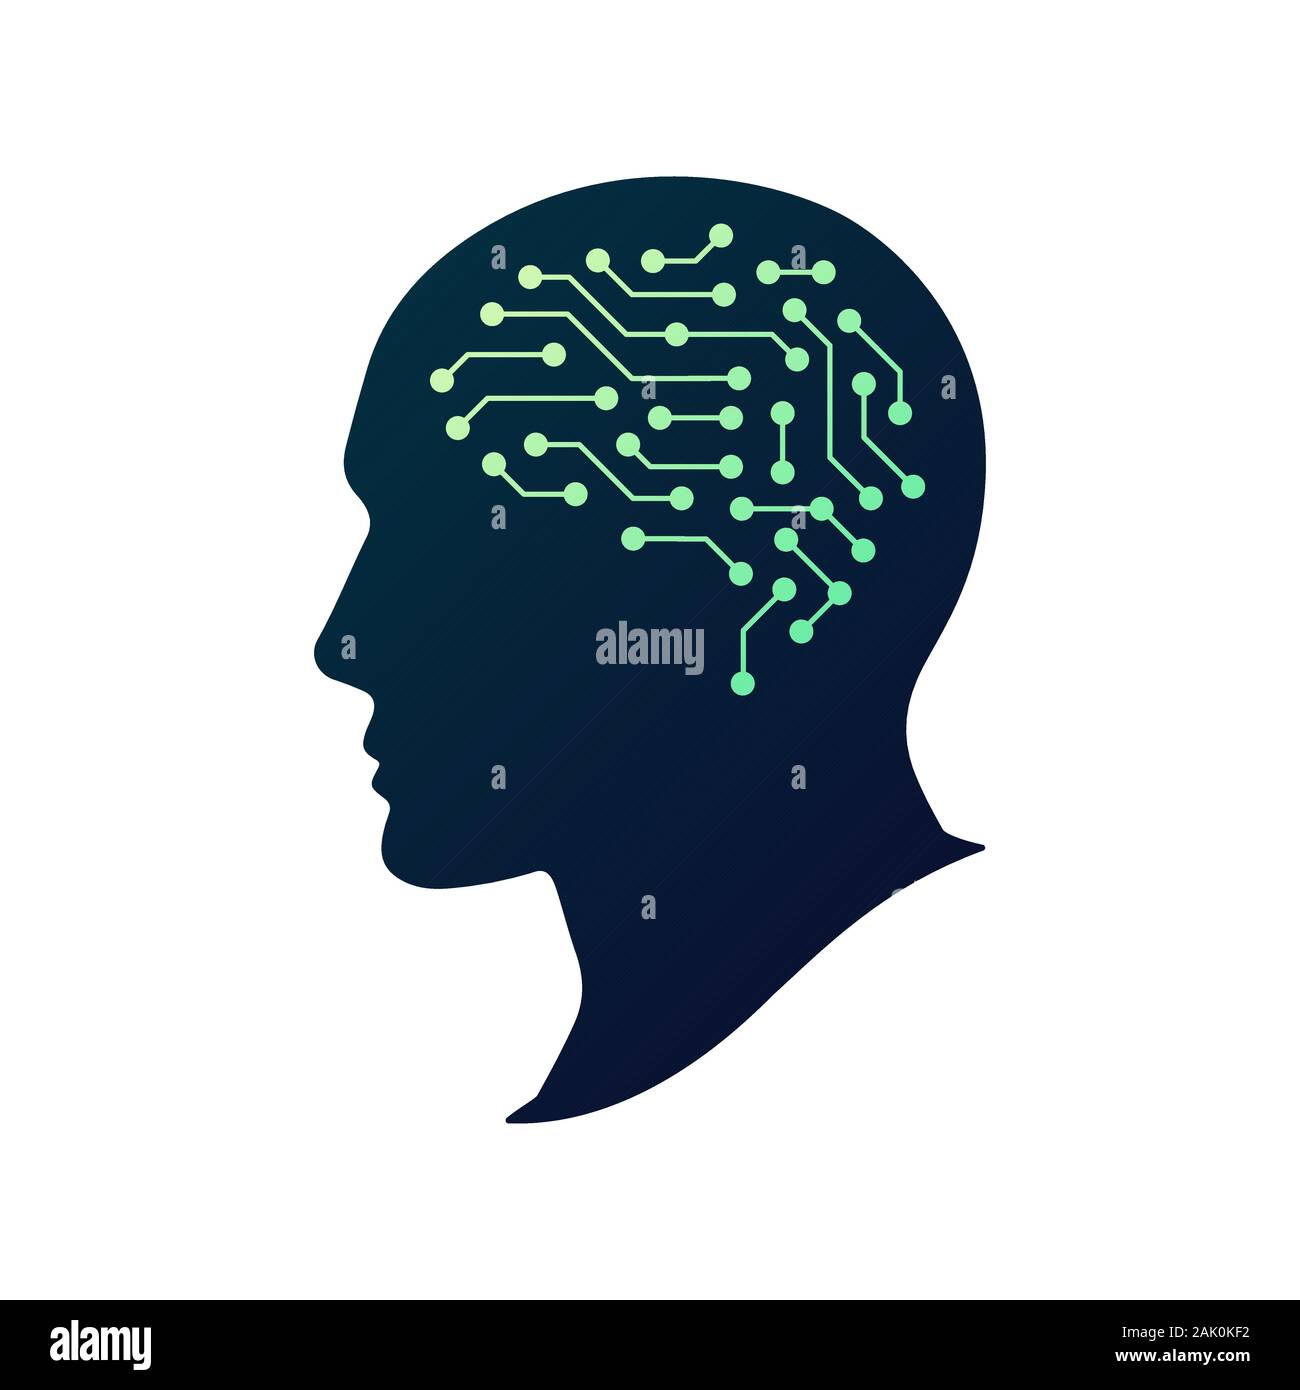 Artificial Intelligence AI vector logo. Artificial human brain. Human head silhouette. Abstract concept of cyber technology, machine learning, robot a Stock Vector